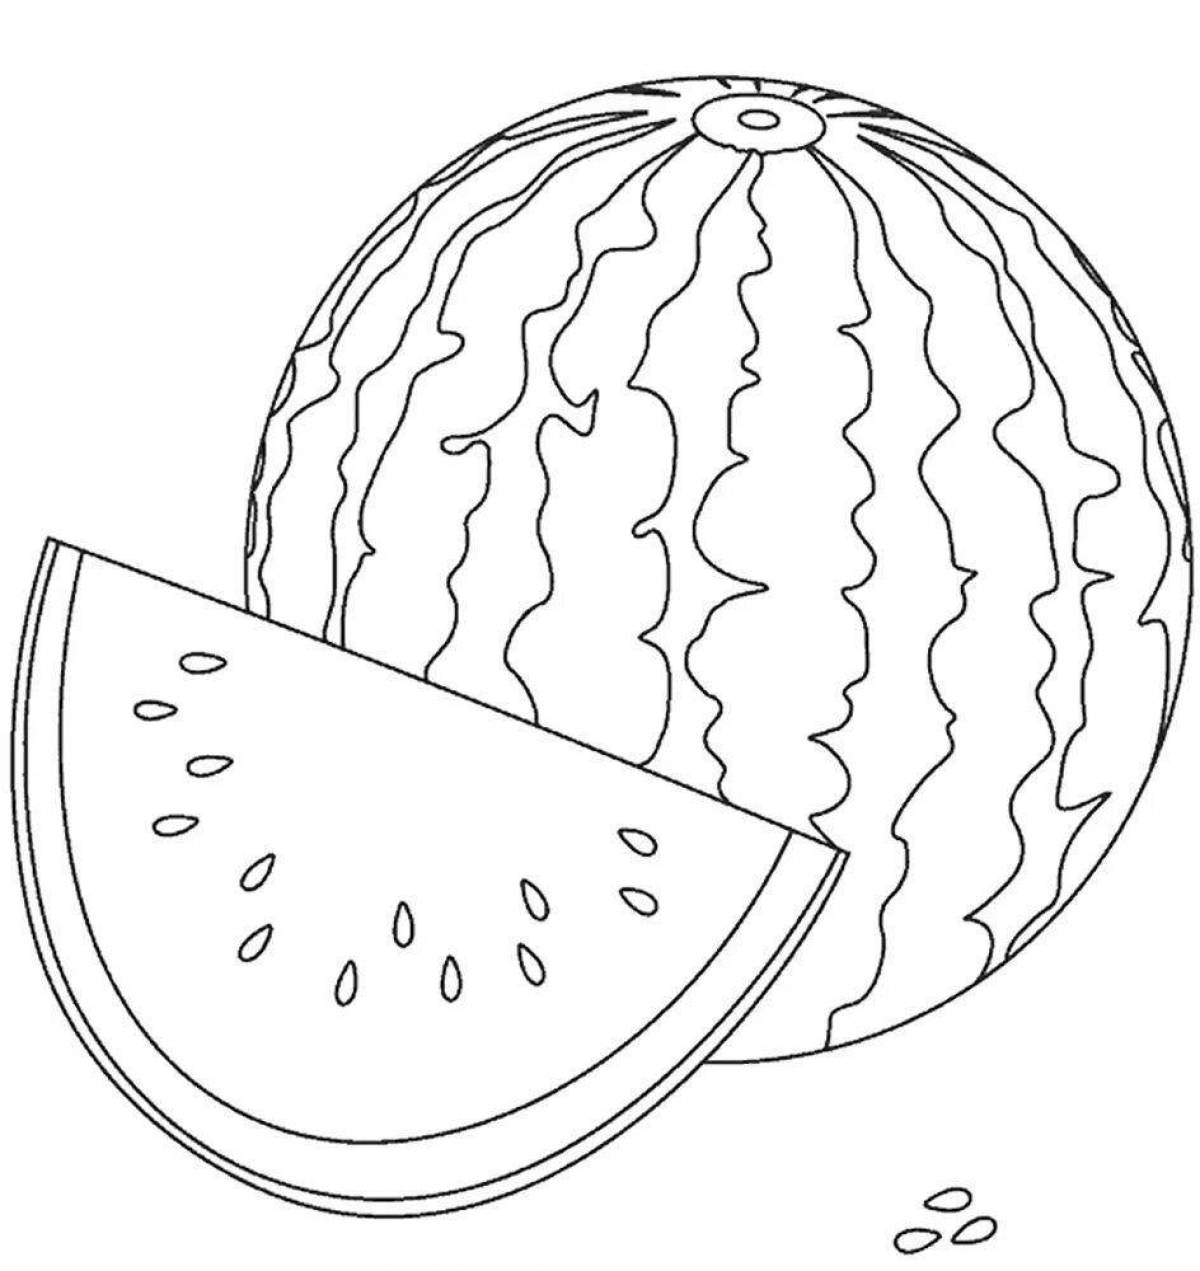 Bright watermelon coloring book for kids